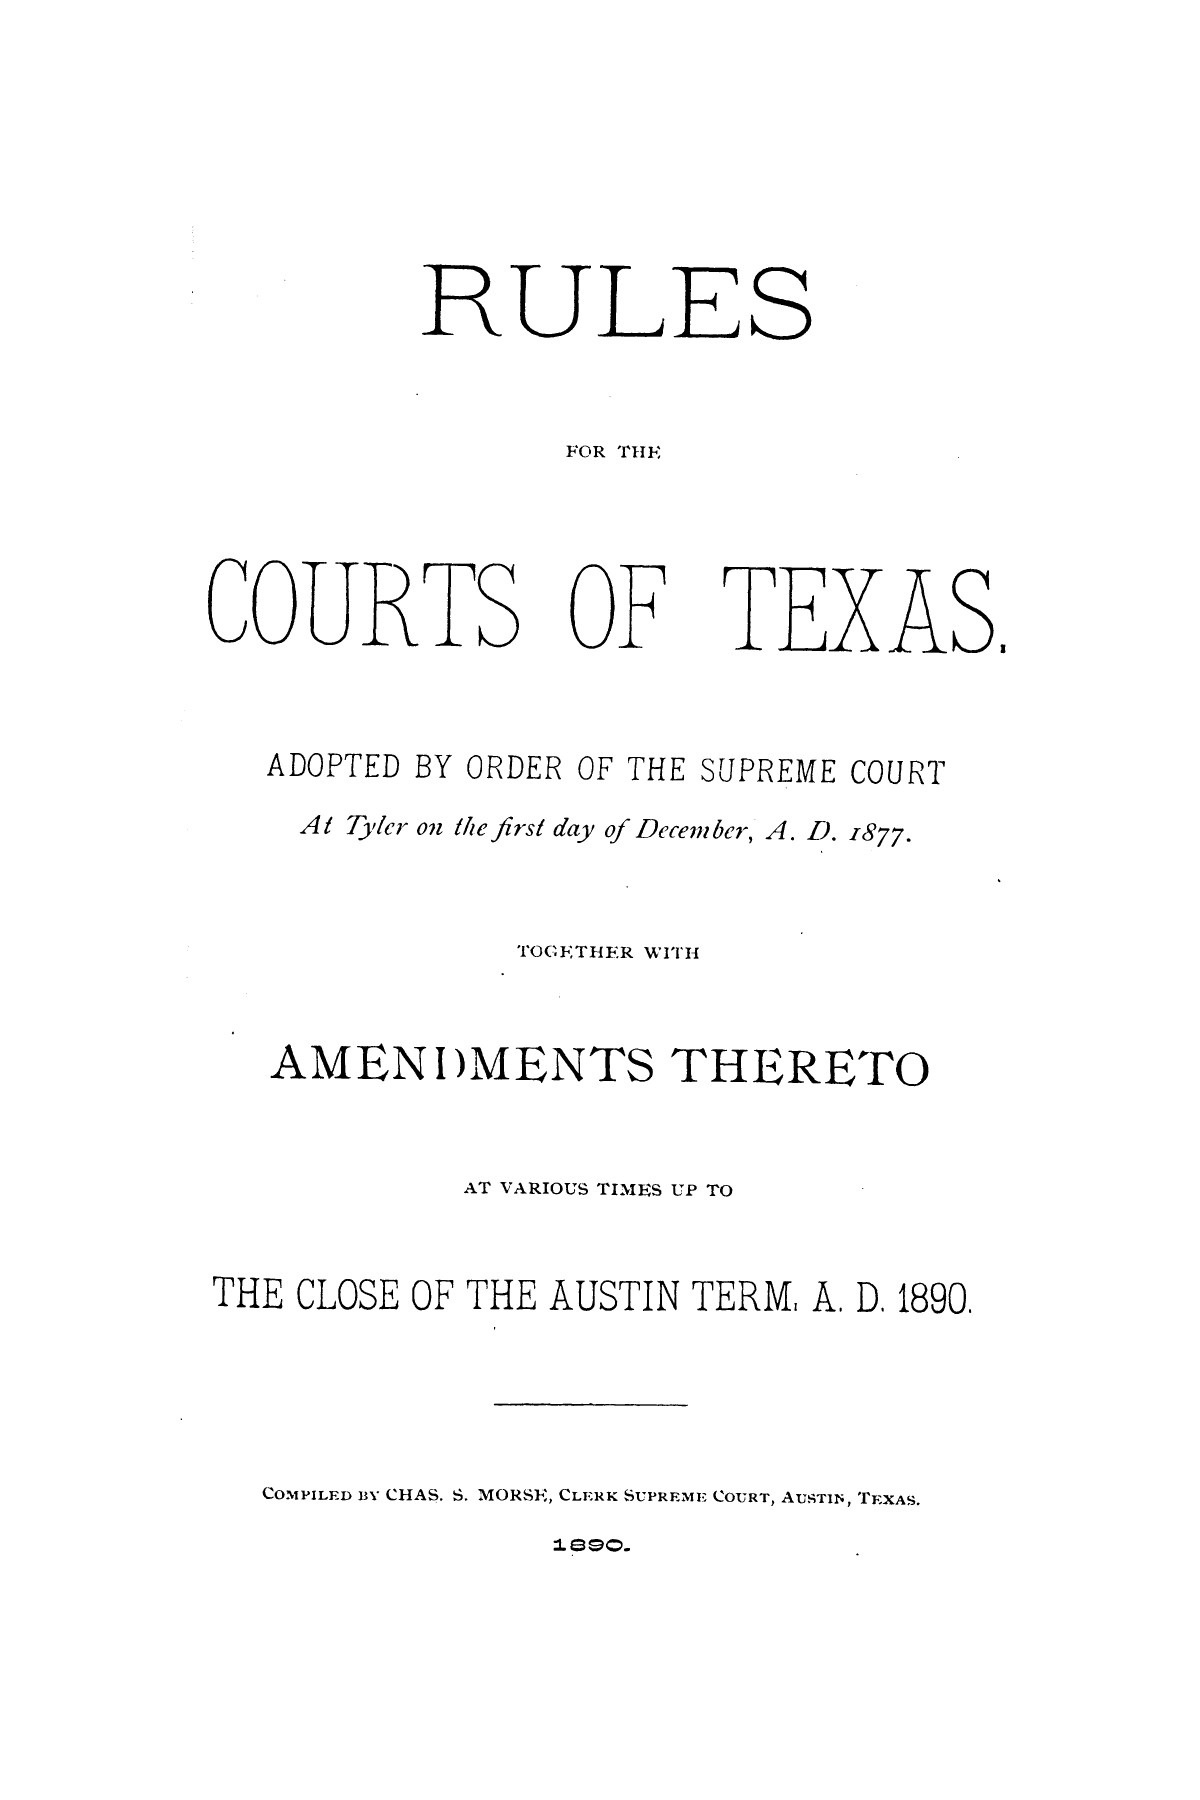 Rules for the courts of Texas: adopted by order of the Supreme Court at Tyler on the first day of December, A.D. 1877: together with amendments thereto at various times up to the close of the Austin term, A.D. 1890
                                                
                                                    [Sequence #]: 1 of 64
                                                